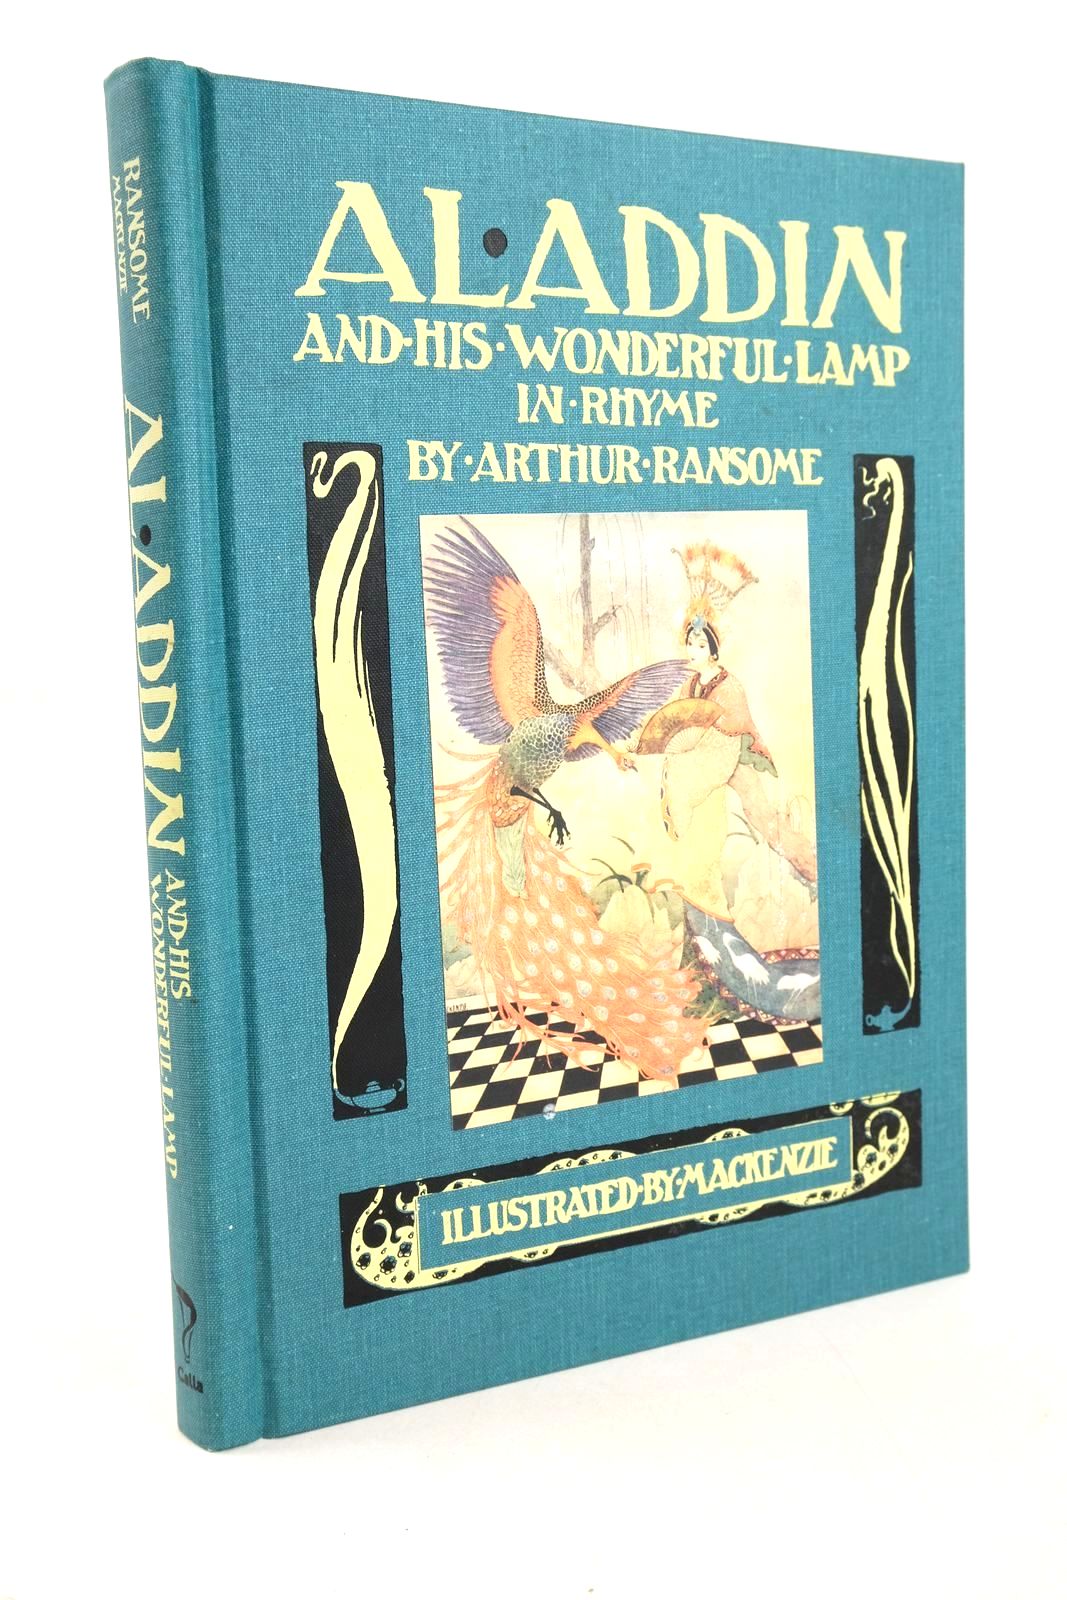 Photo of ALADDIN AND HIS WONDERFUL LAMP IN RHYME written by Ransome, Arthur illustrated by Mackenzie, Thomas published by Calla Editions (STOCK CODE: 1327695)  for sale by Stella & Rose's Books